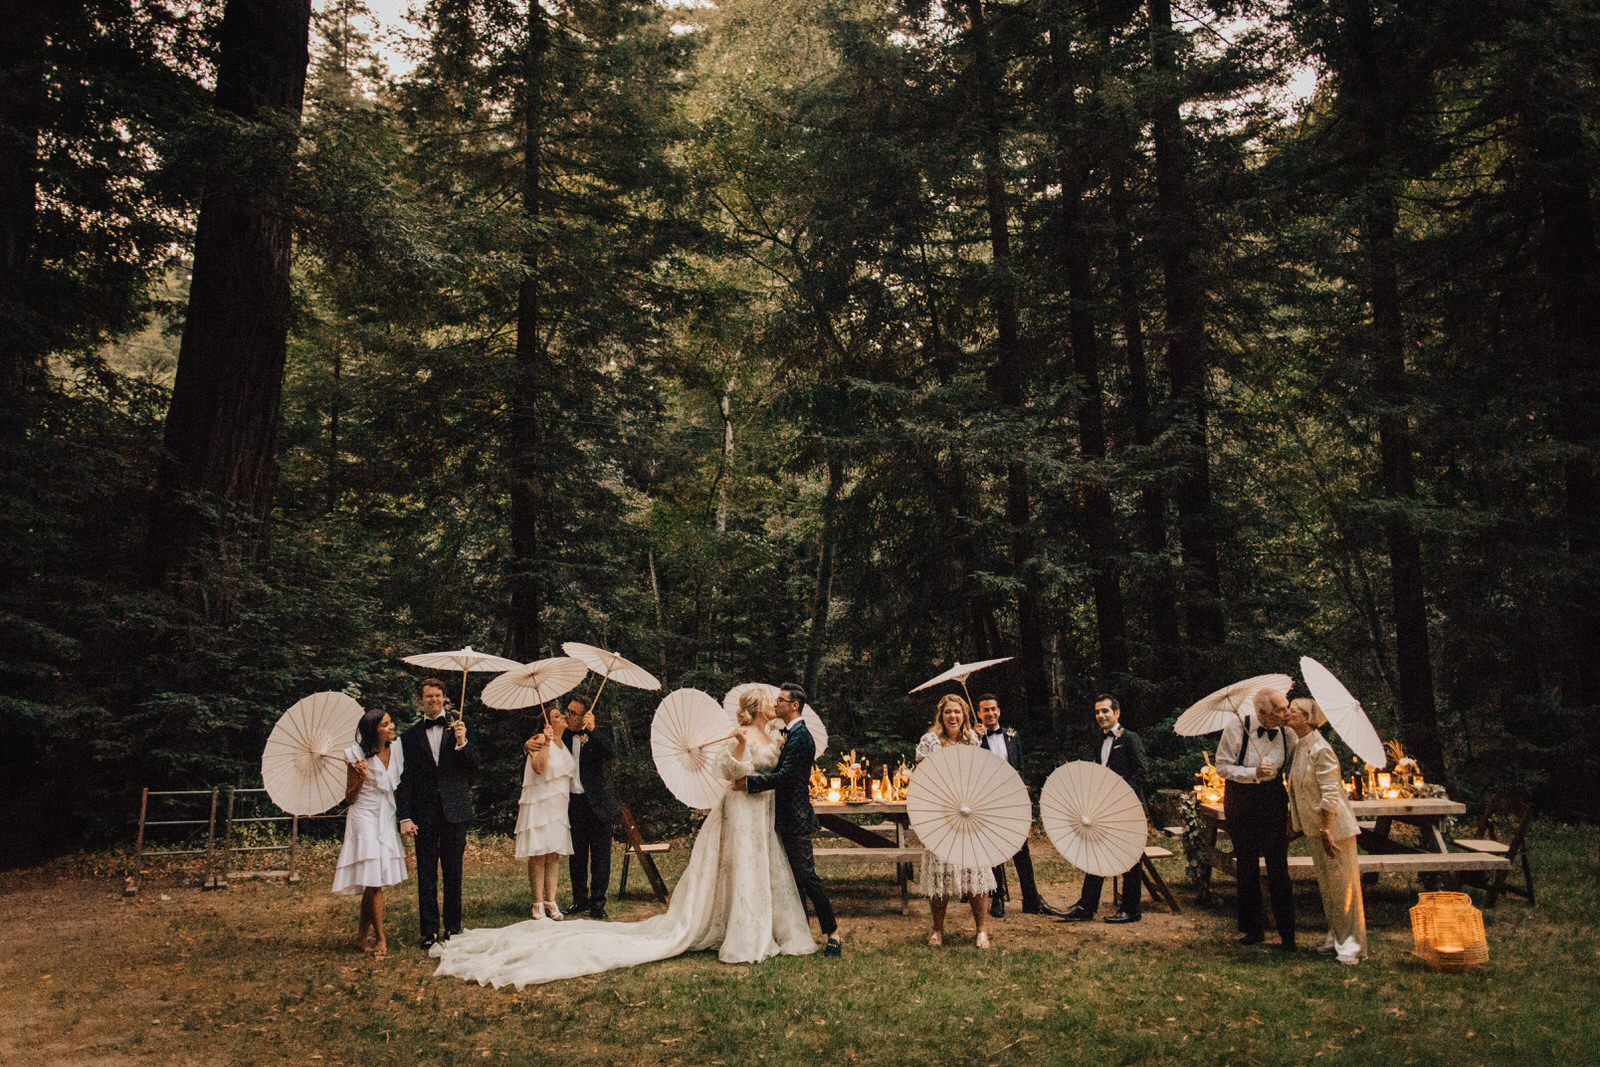 Wedding party with parasols